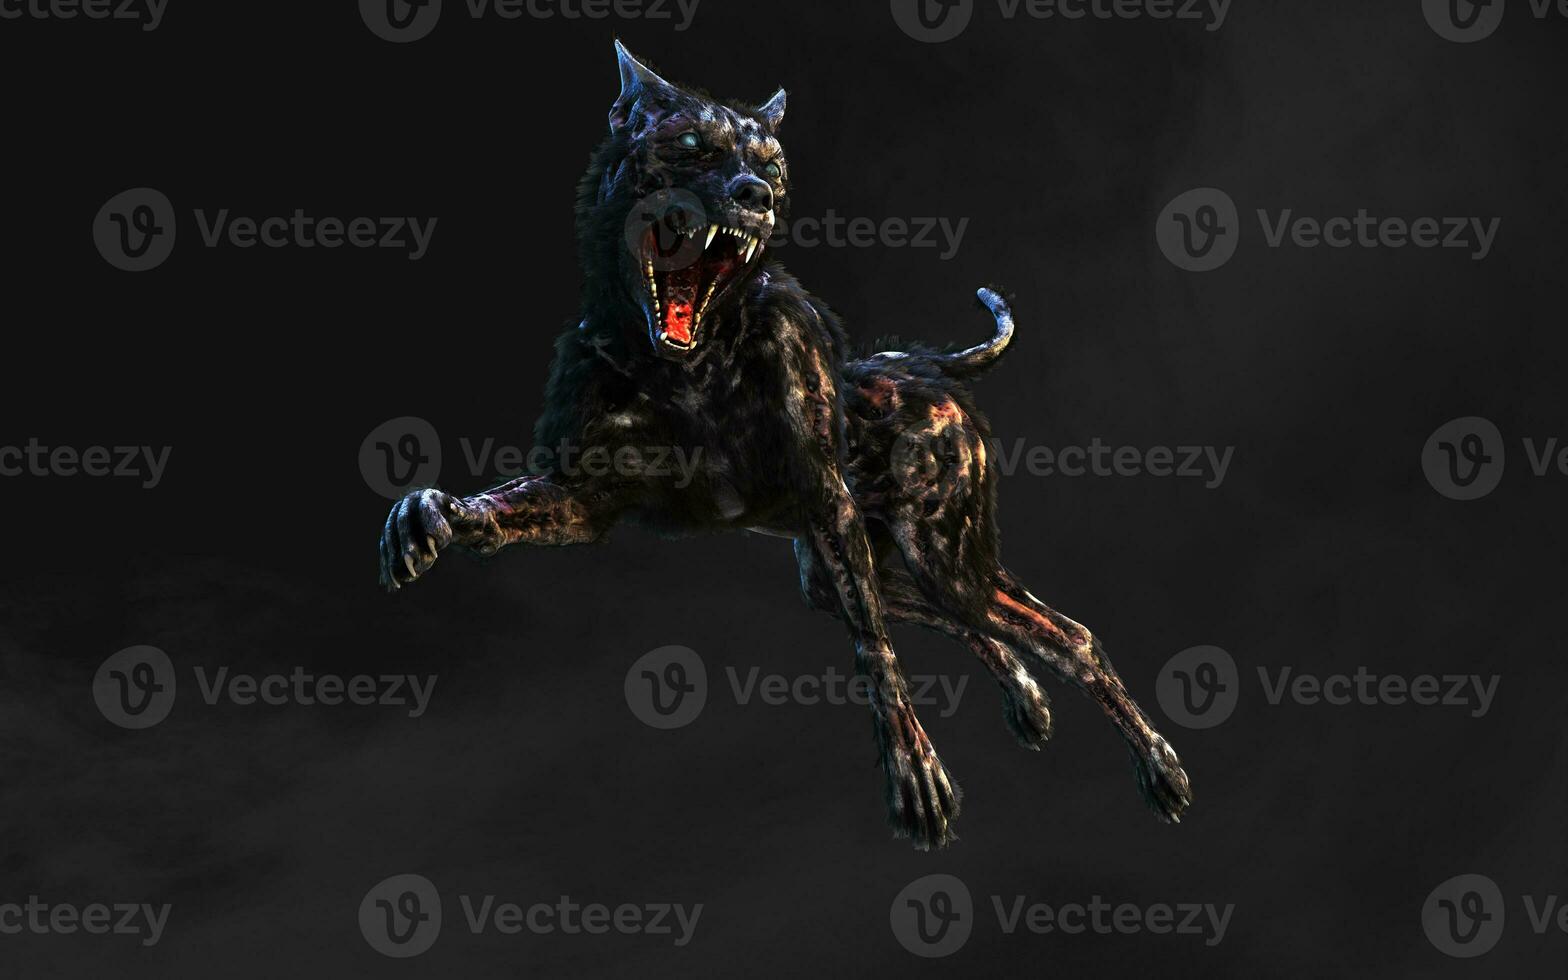 3d illustration of undead Zombie dog with clipping path. Dangerous revived animal with creepy expression on dark background. photo